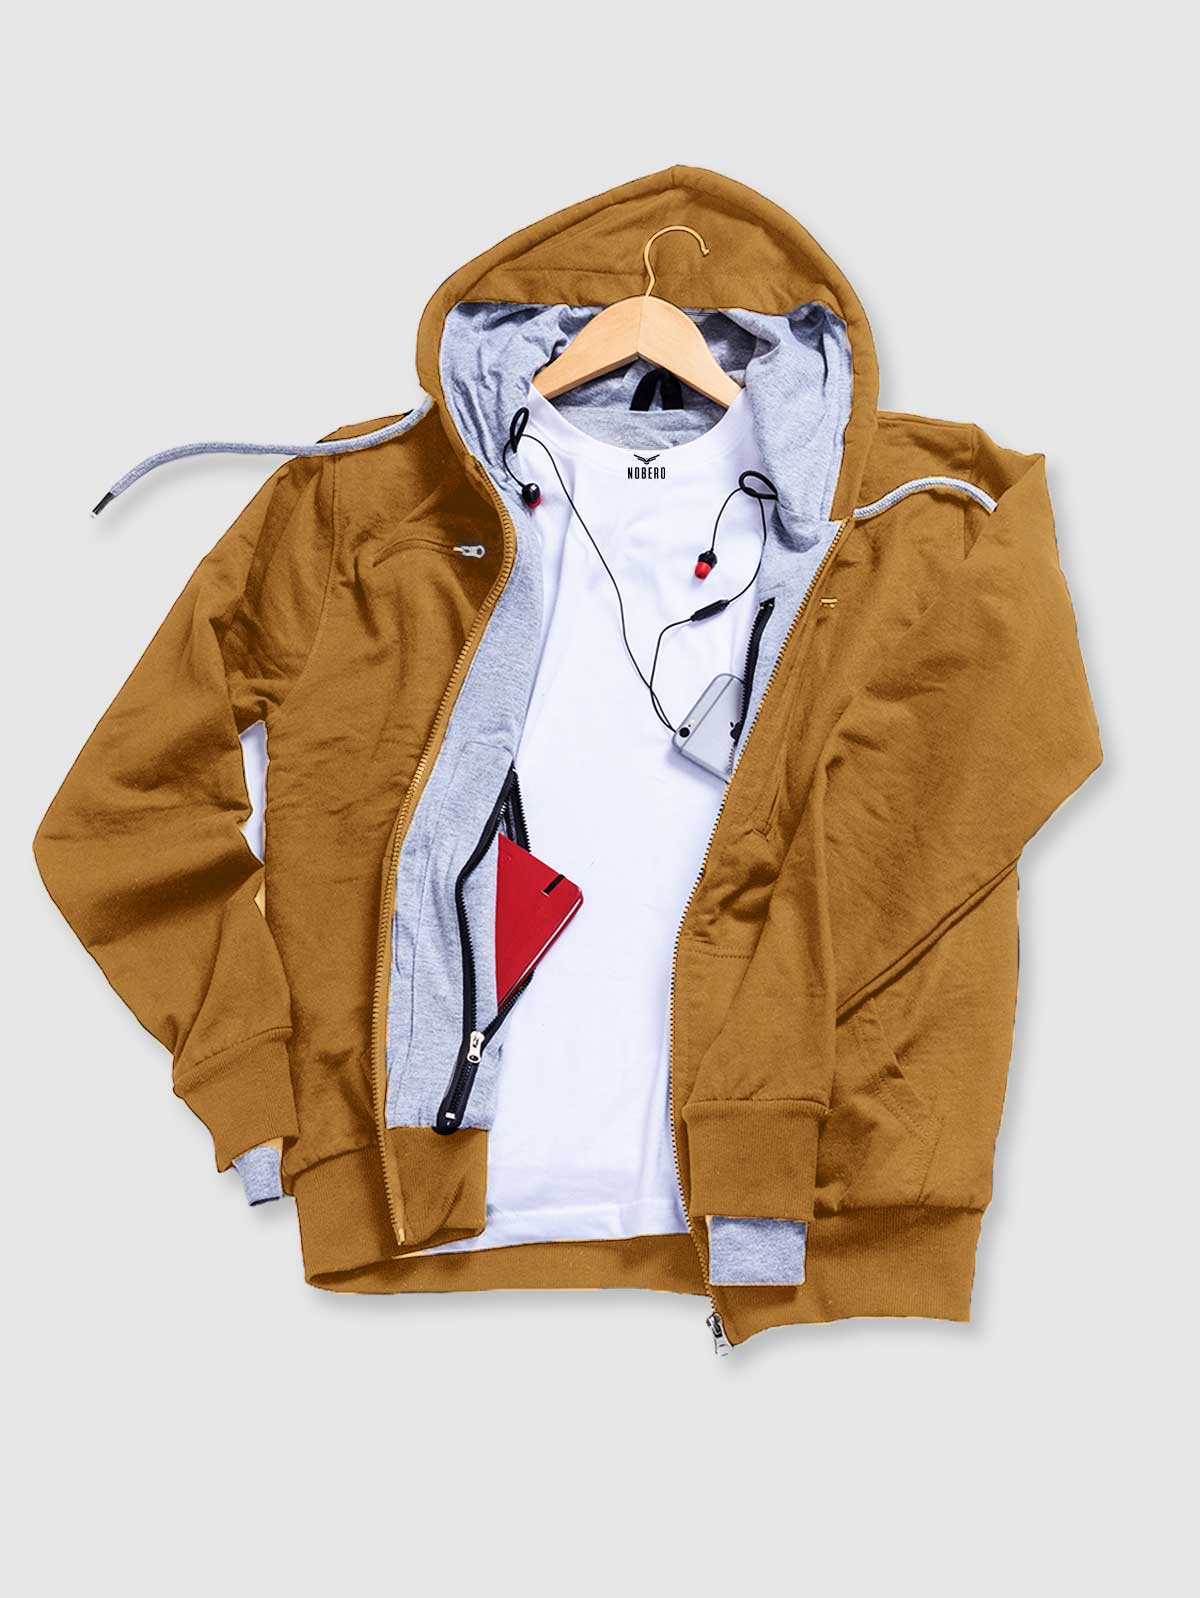 Trendy Hoodie Collection for Men and Women